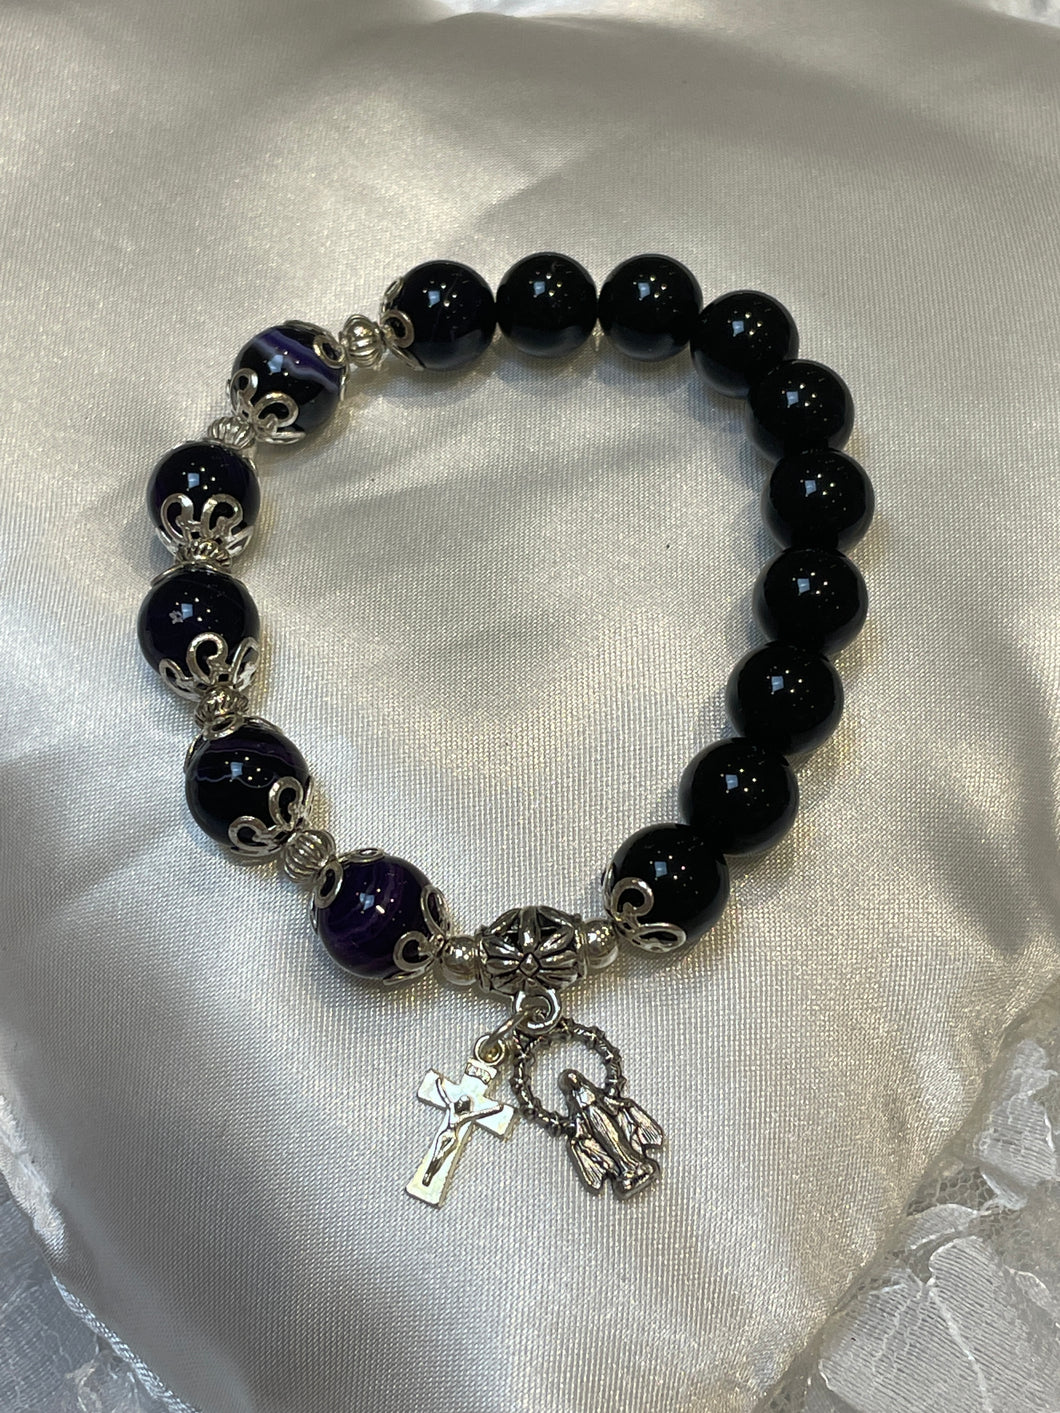 Black Gemstone Rosary Bracelet with Our Lady of Grace and Crucifix Charms